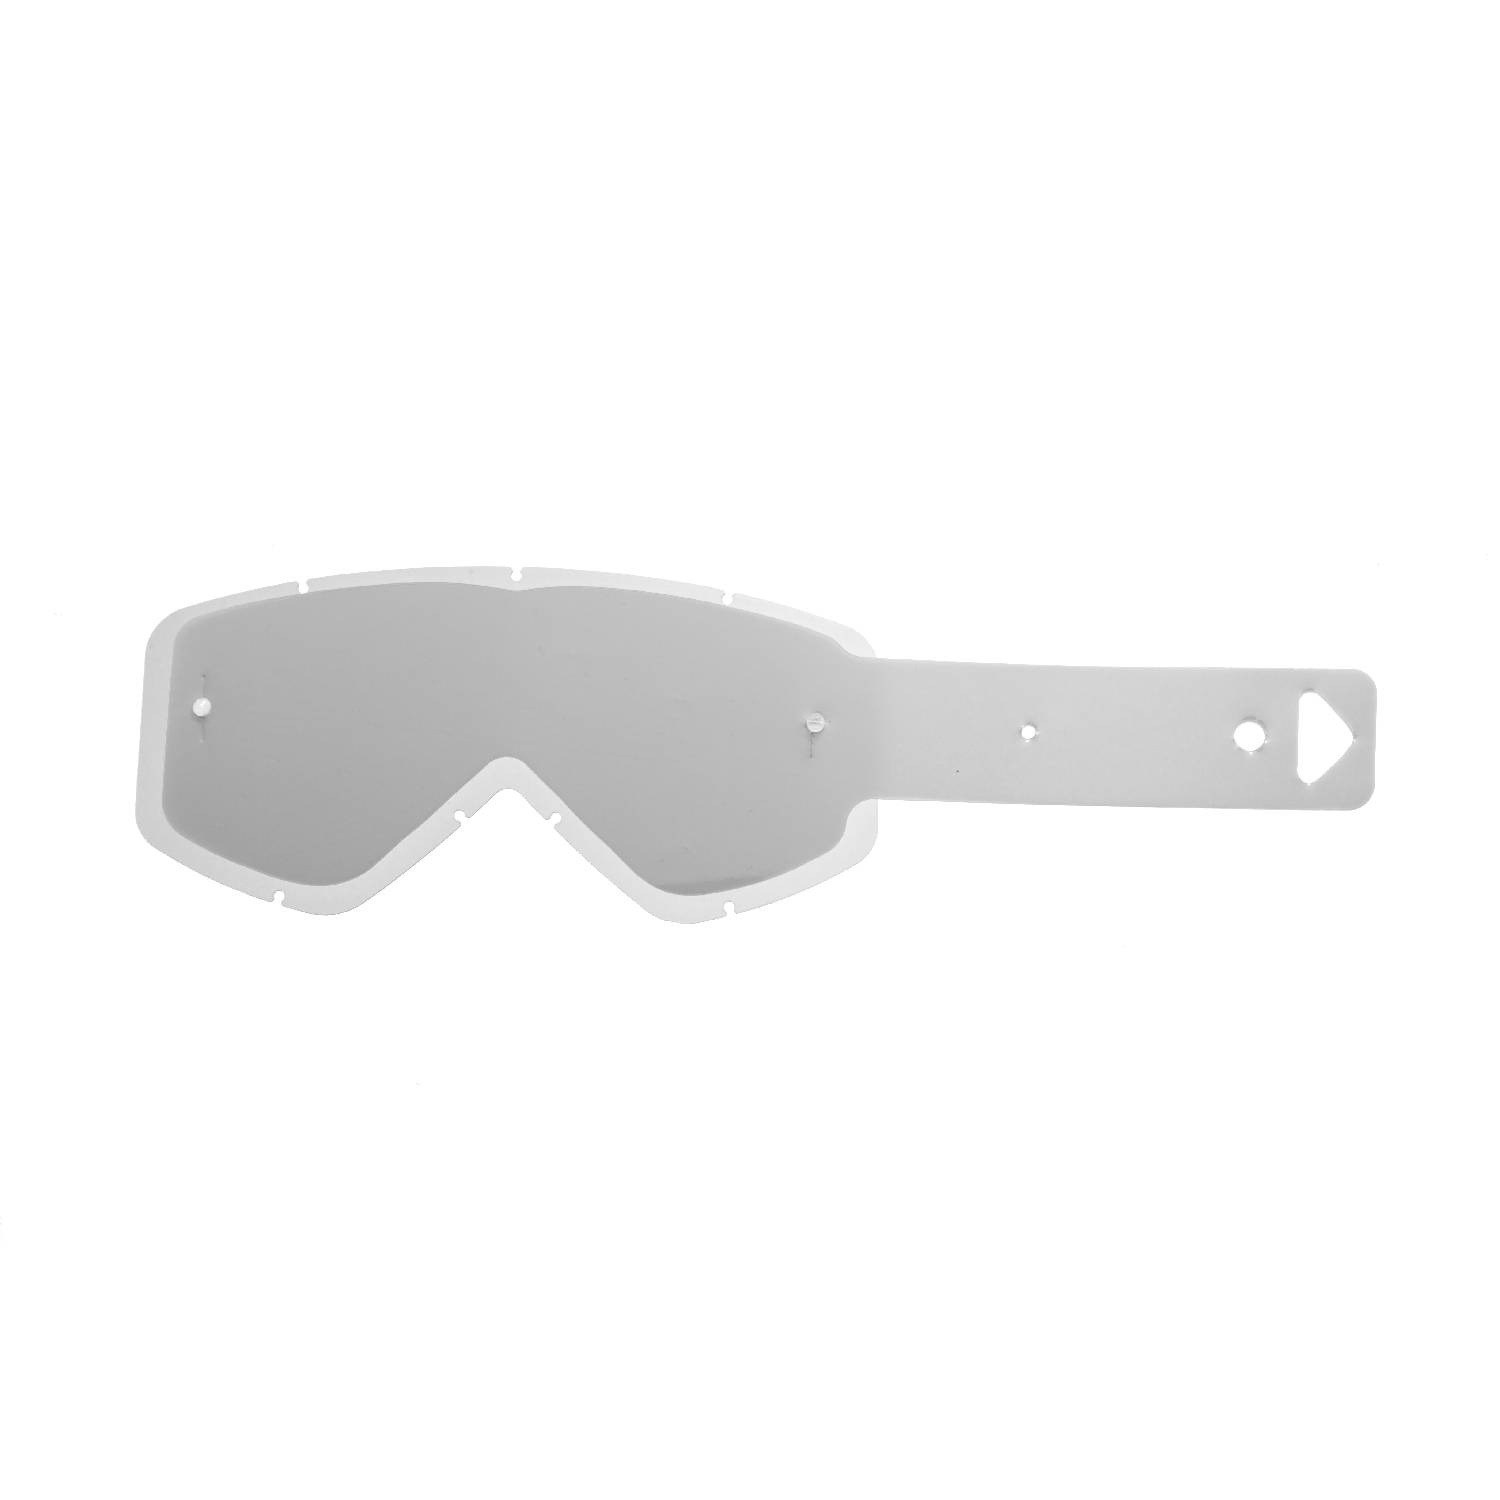 combo lenses with clear lenses with 10 tear off compatible for Smith Fuel / Intake / V1 / V2 goggle